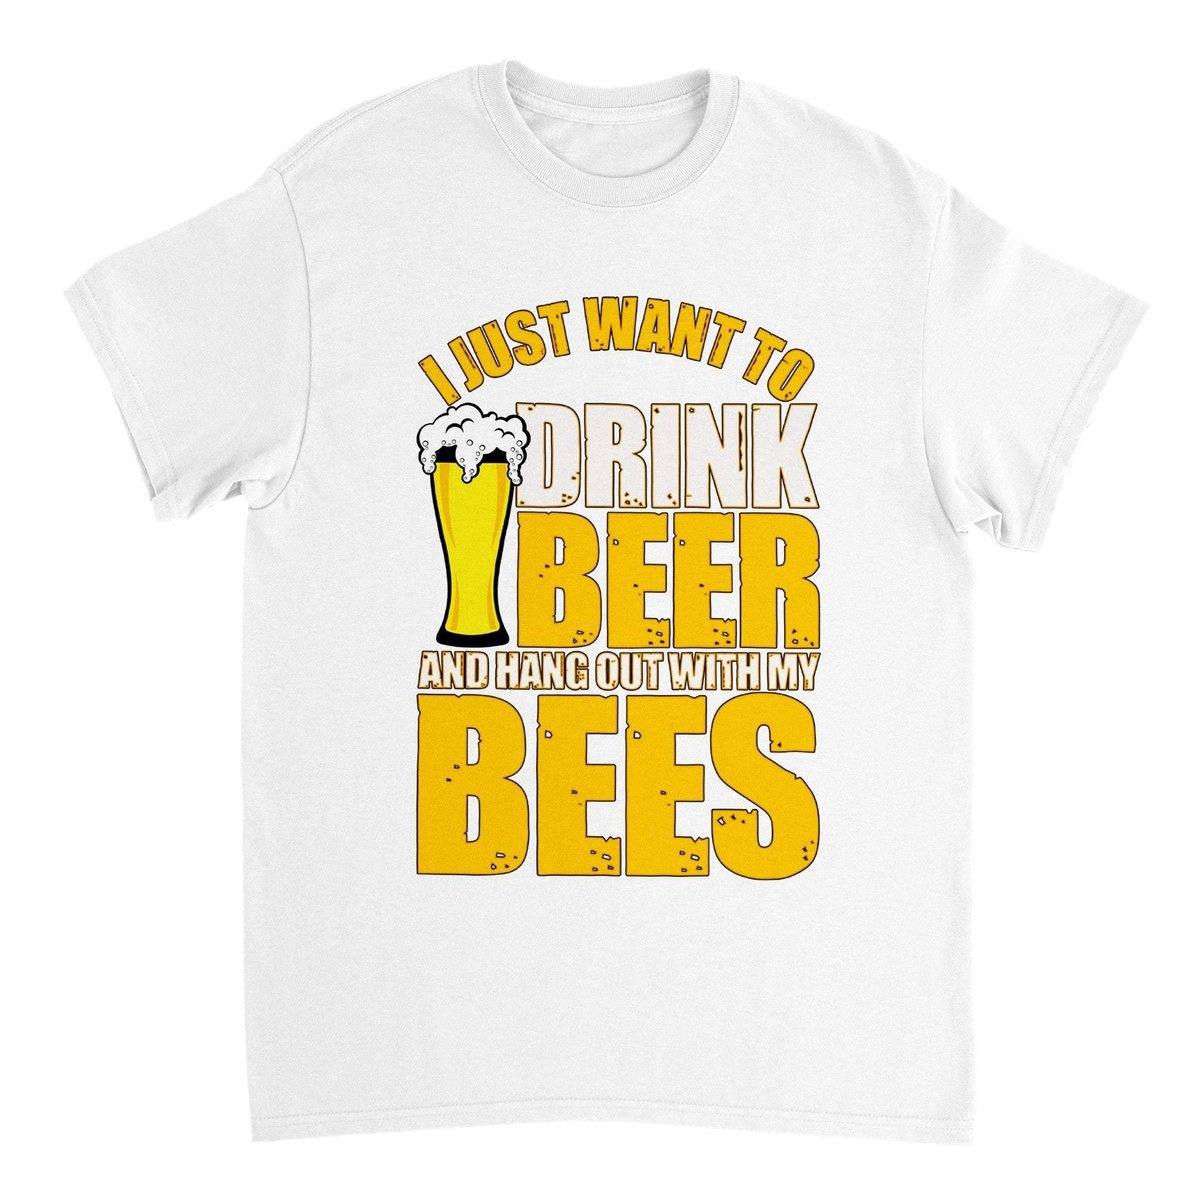 I Just Want To Drink Beer And Hang Out With My Bees T-Shirt - Funny Bee Beer Tshirt - Unisex Crewneck T-shirt Australia Online Color White / S